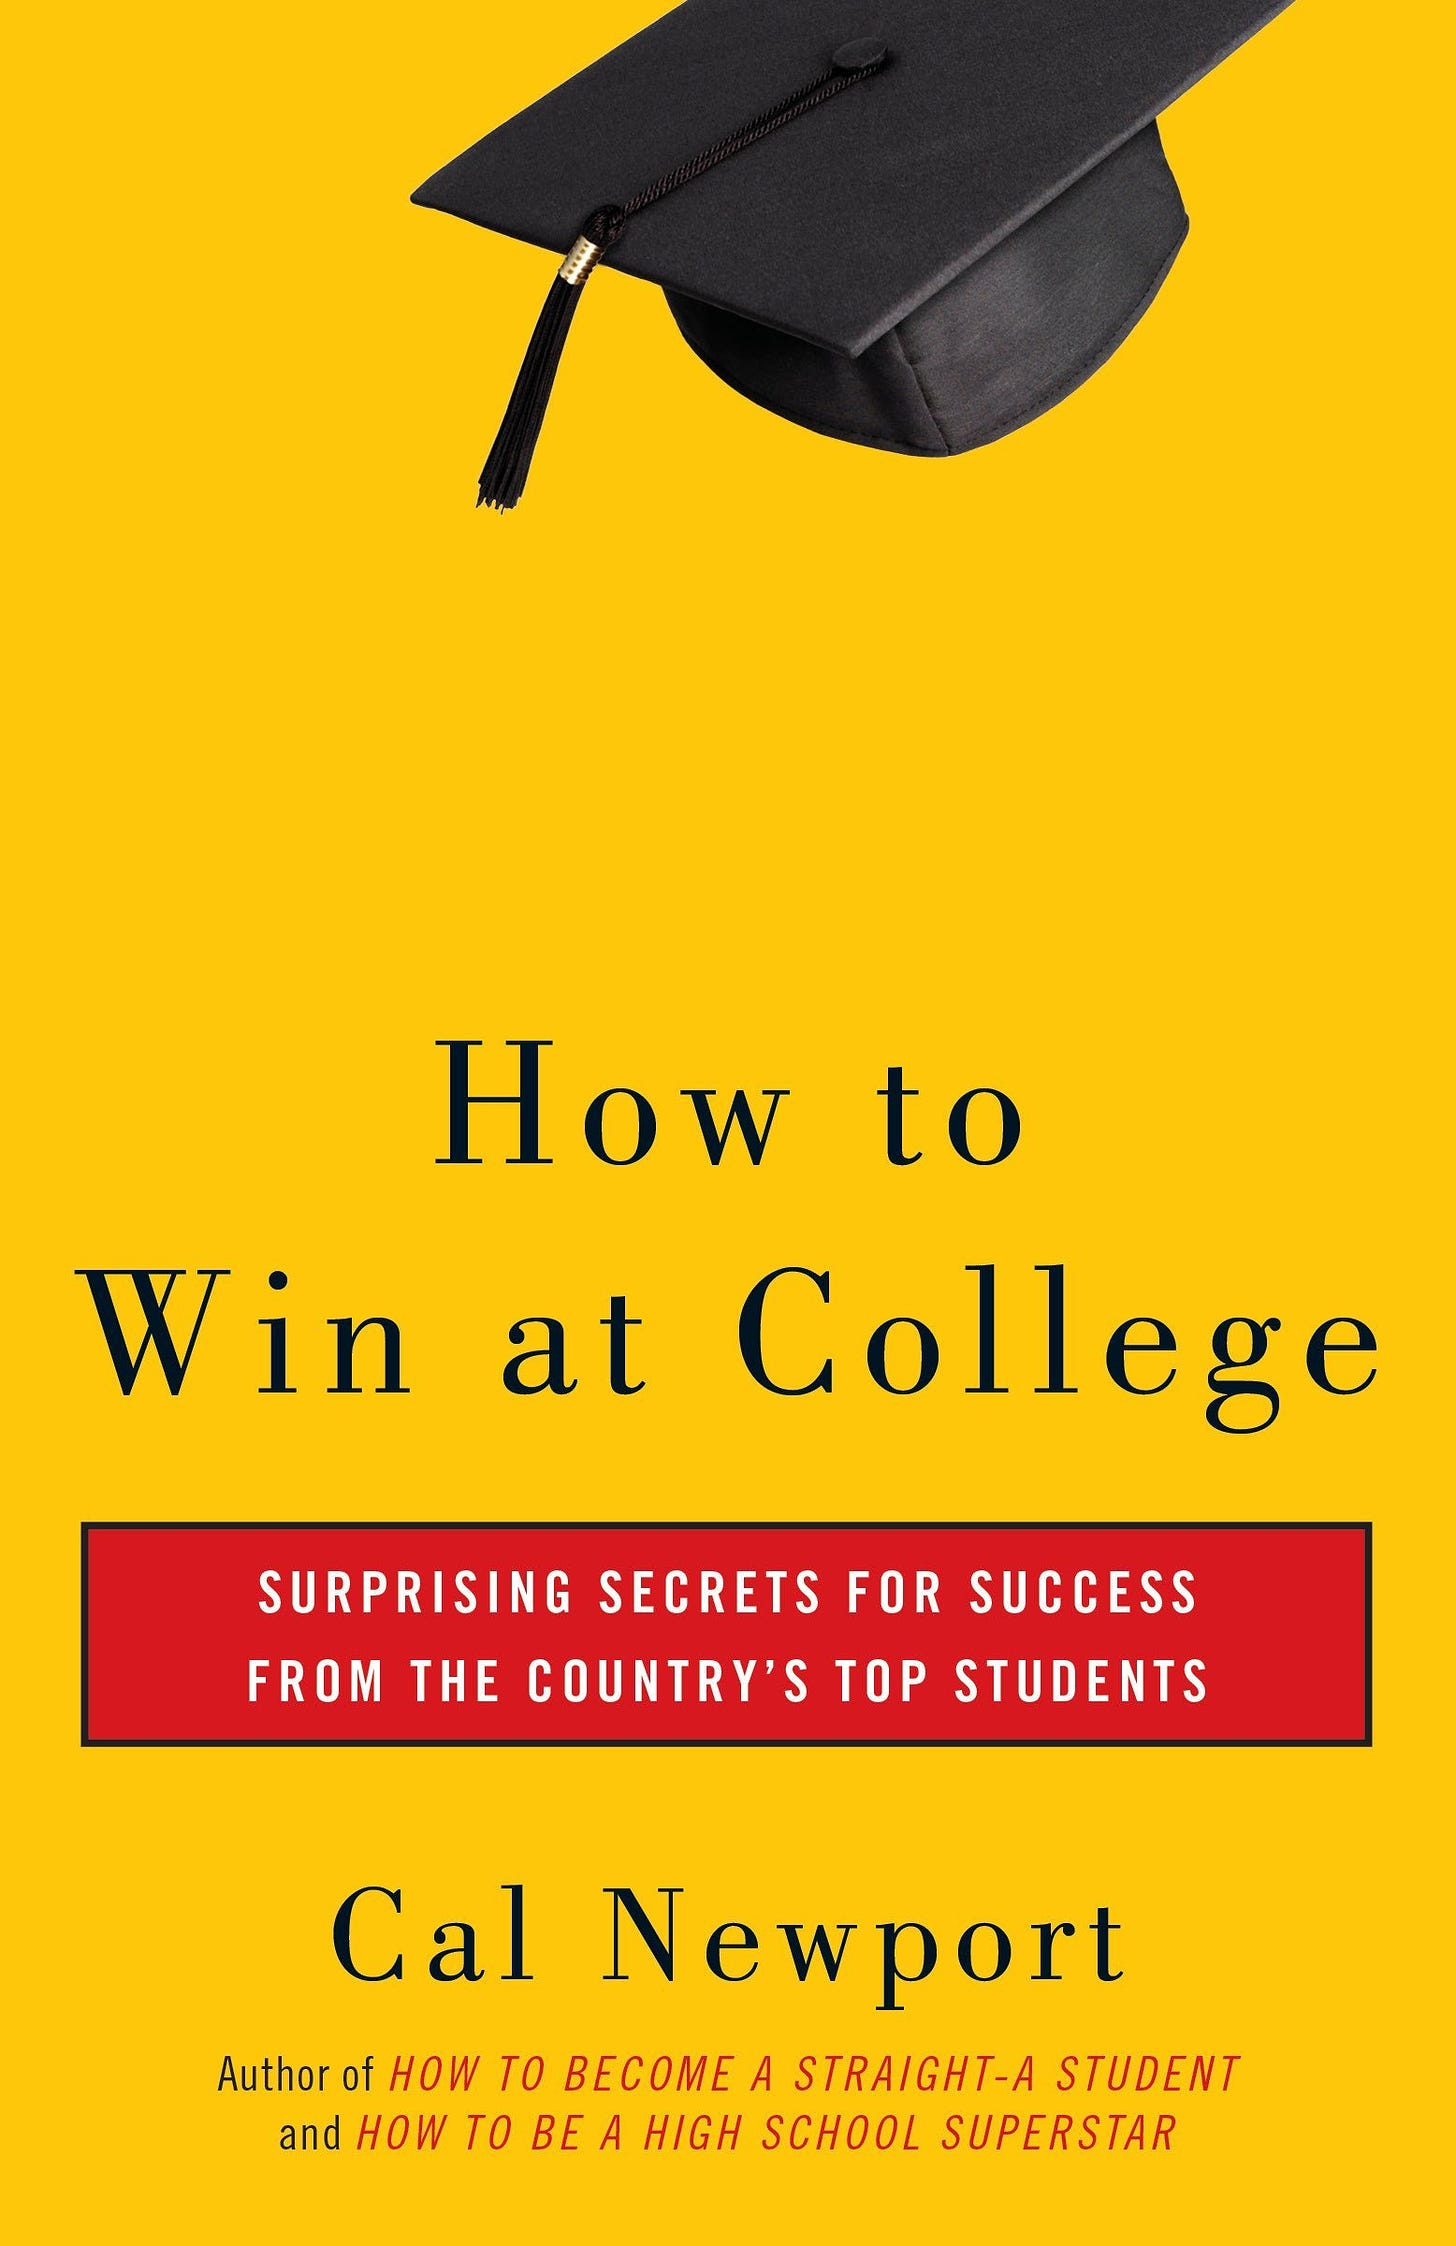 Amazon.com: How to Win at College: Surprising Secrets for Success ...